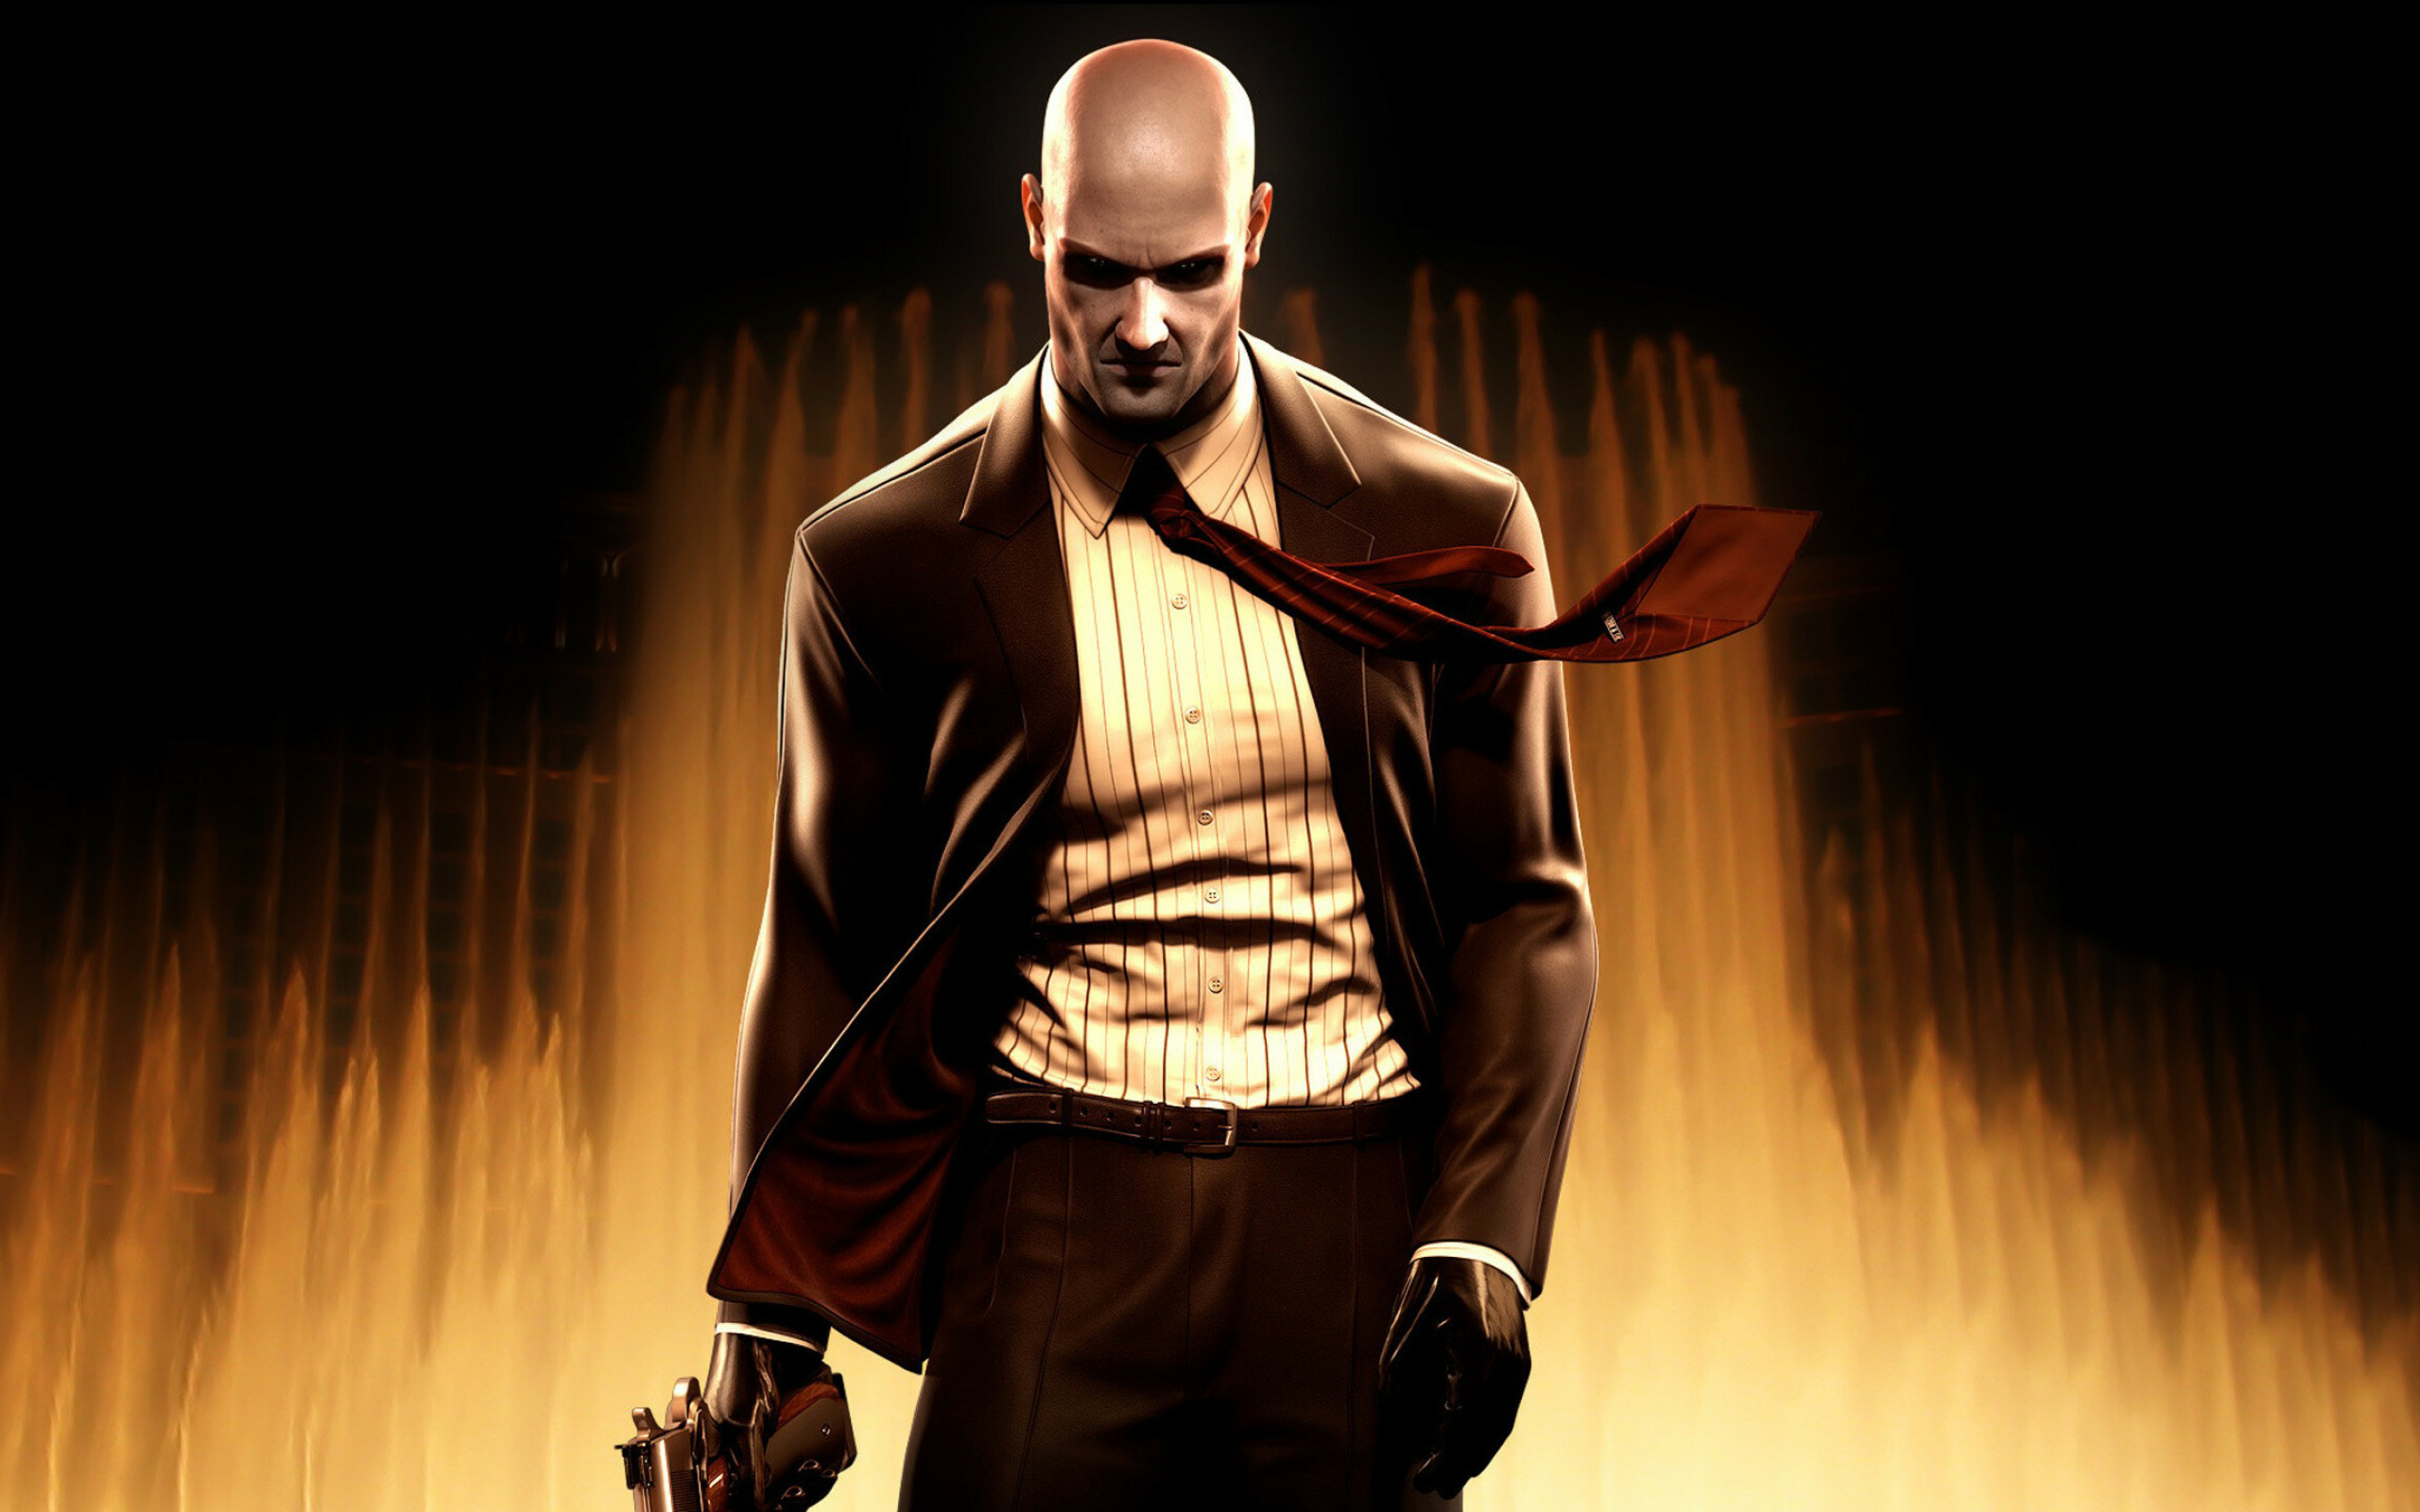 Hitman Blood Money 2 wallpaper, Dark and gritty, Intriguing storyline, Compelling characters, 2560x1600 HD Desktop